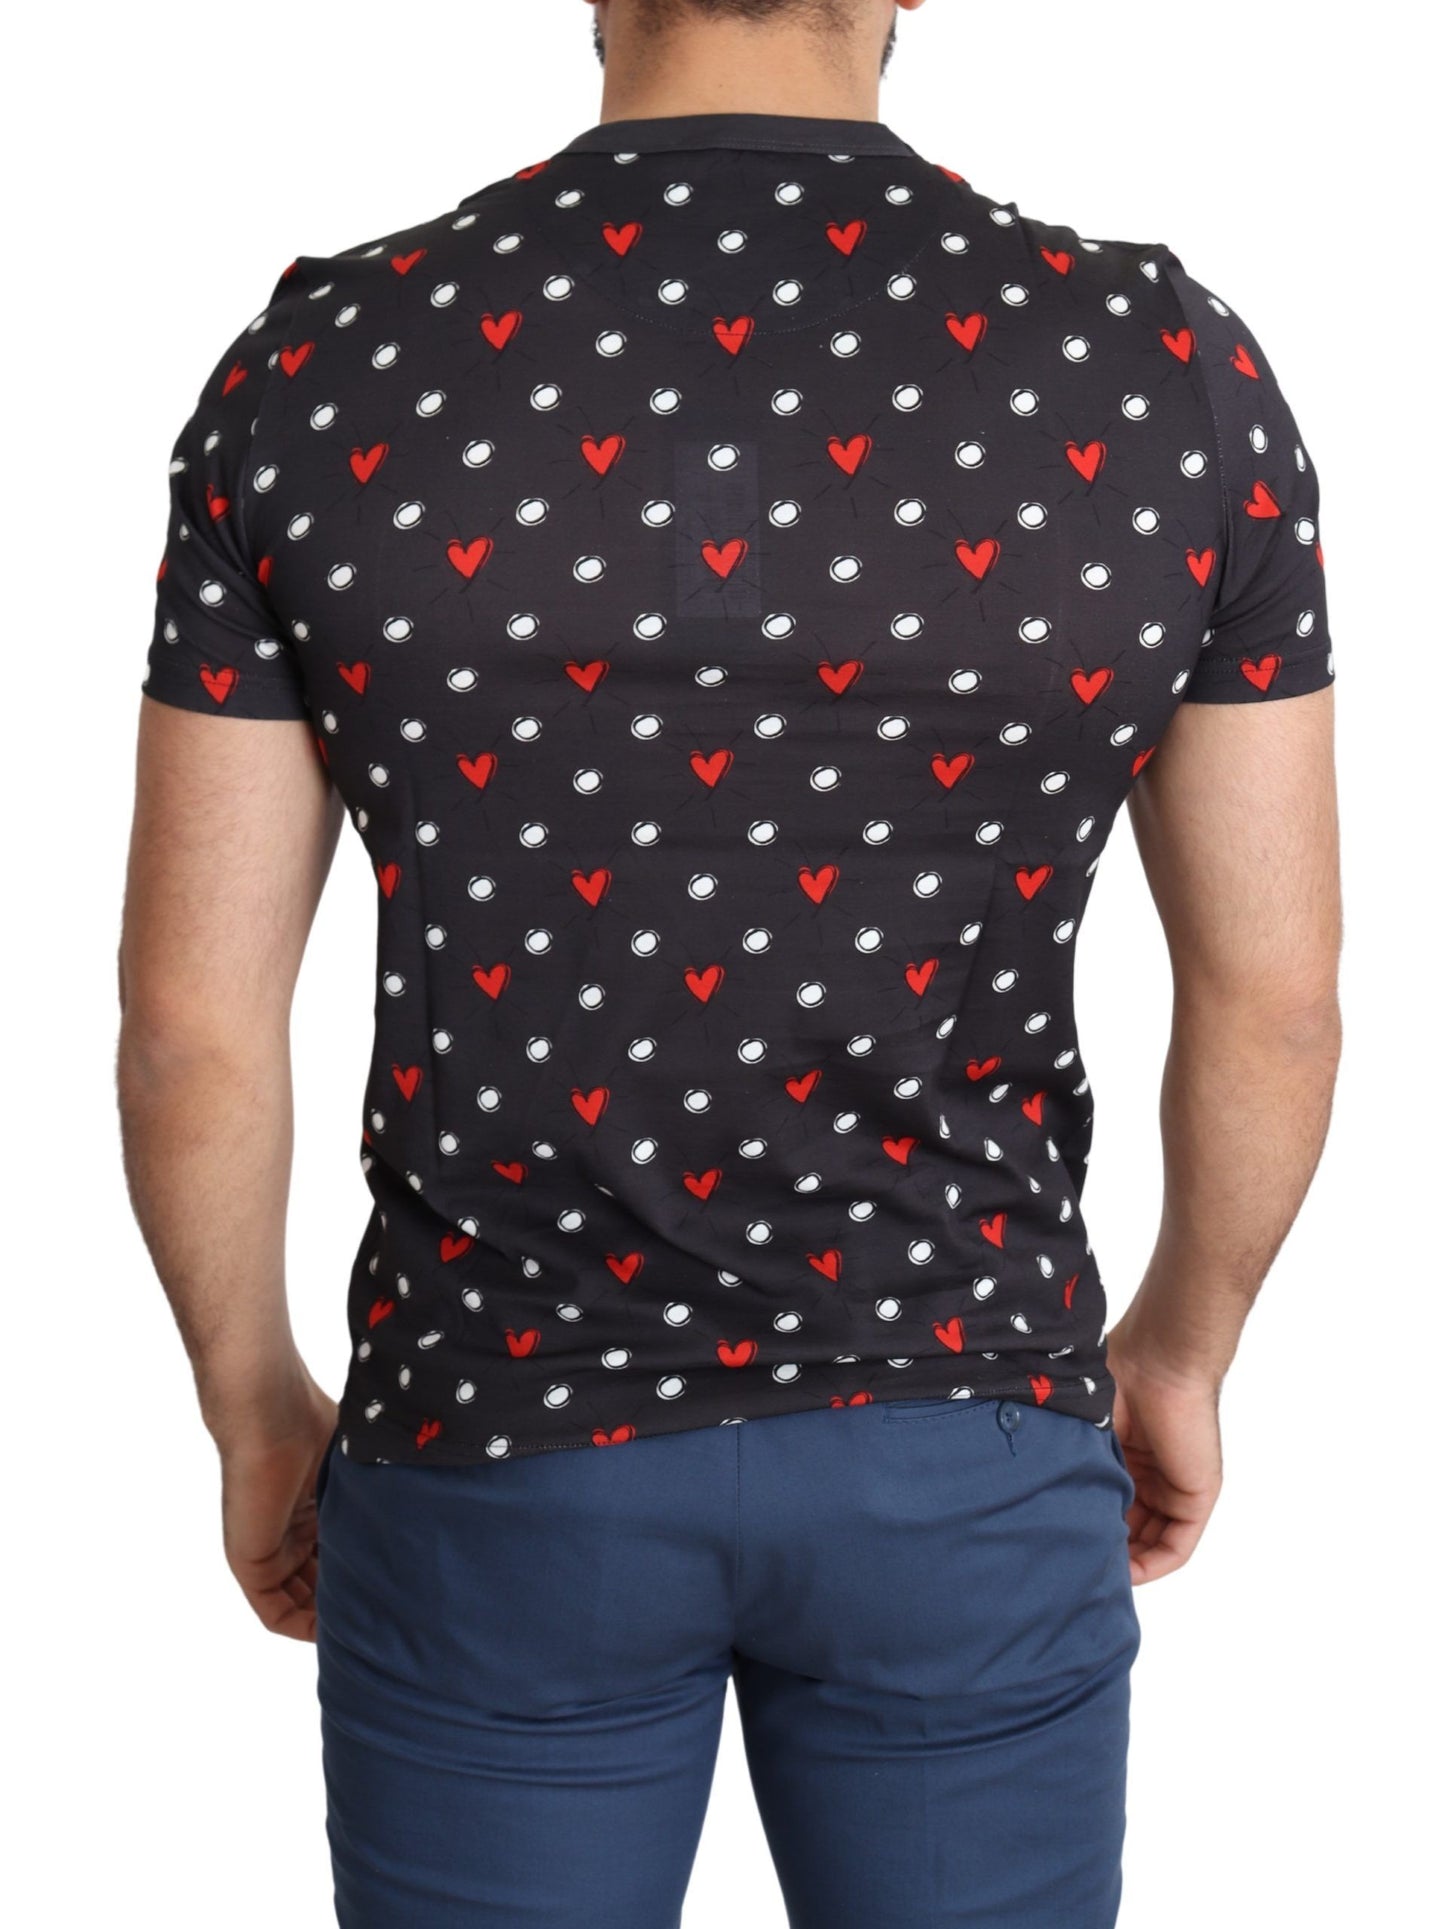 Dolce & Gabbana Chic Gray Cotton T-Shirt with Heart Prints